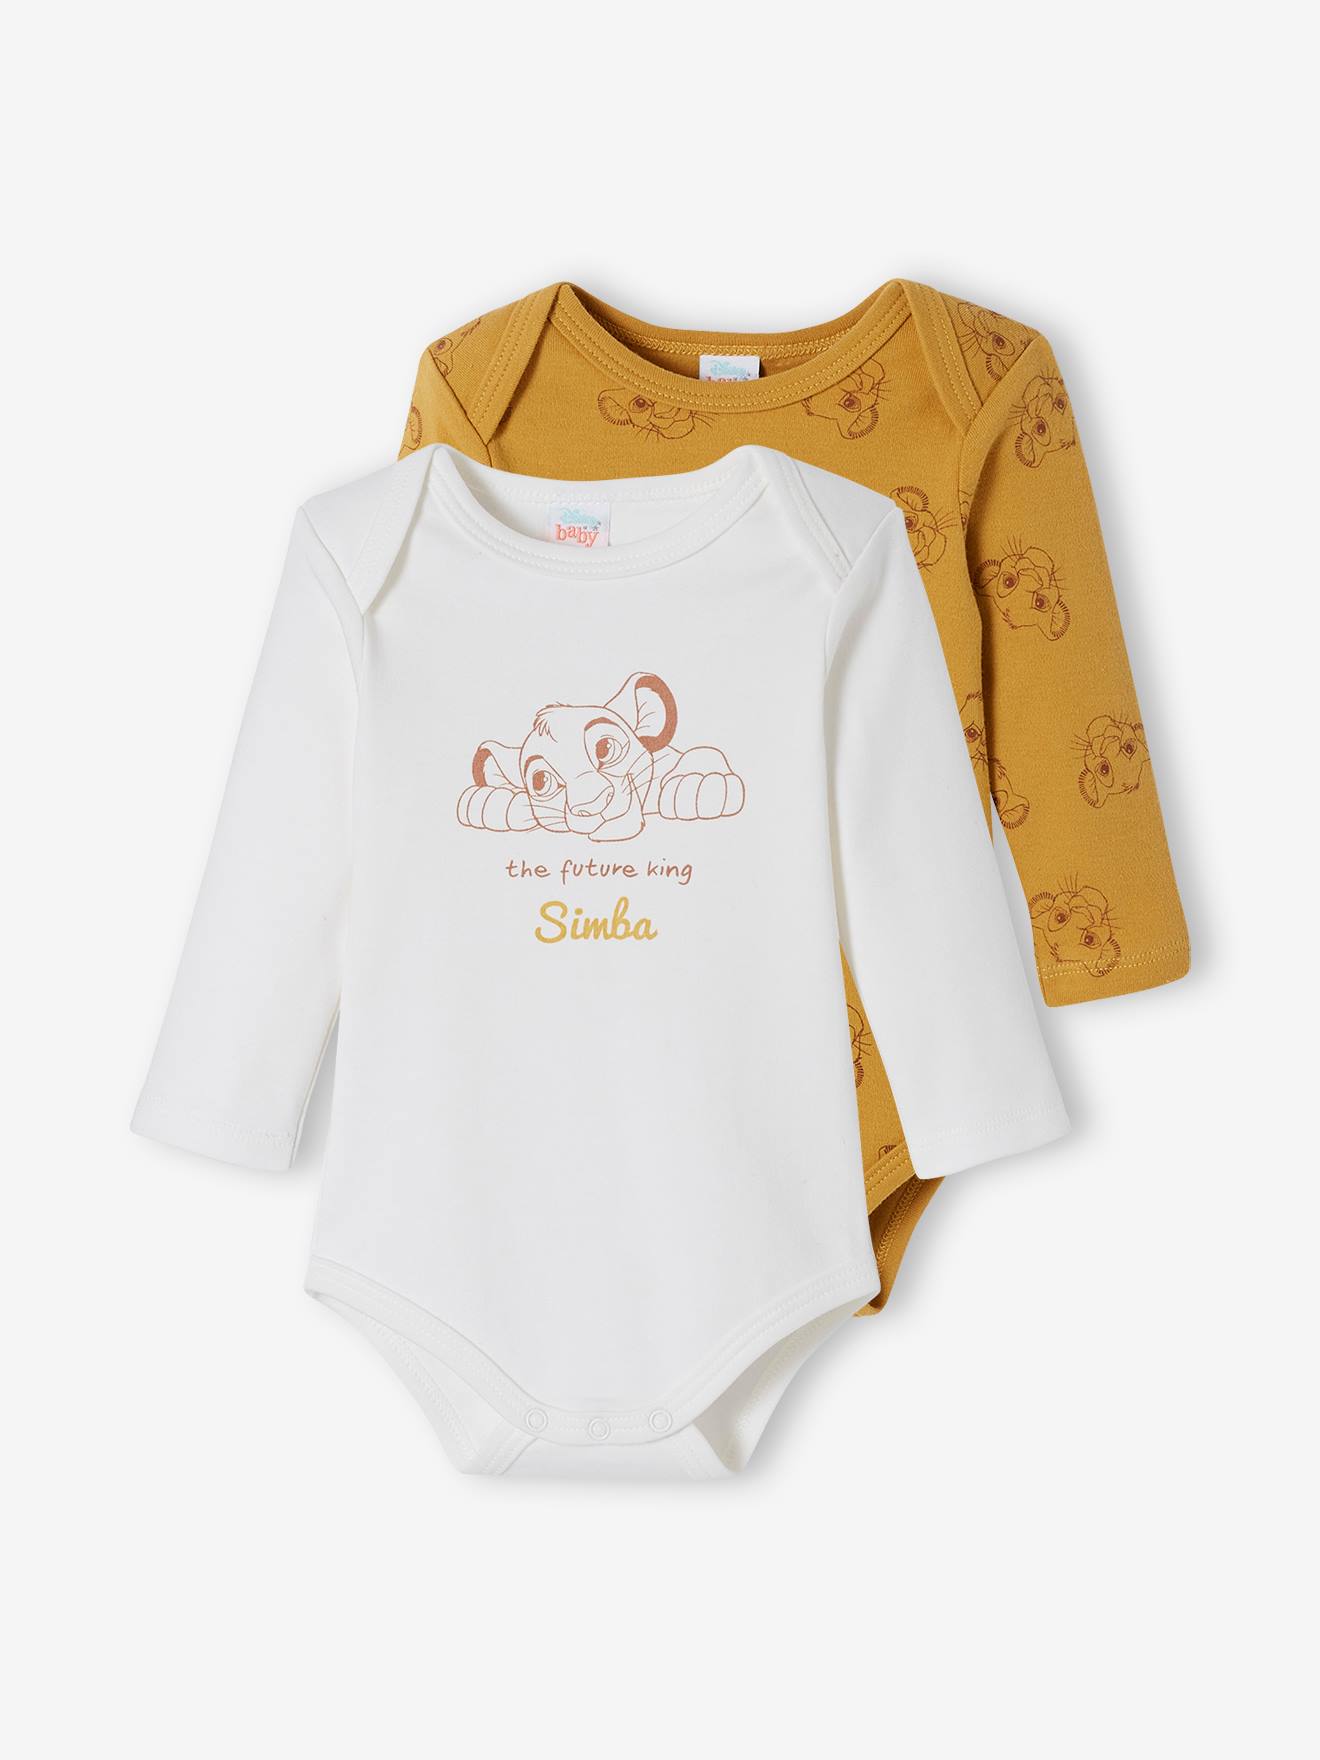 Pack of 2 Bodysuits, The Lion King by Disney(r), for Babies yellow dark solid with design